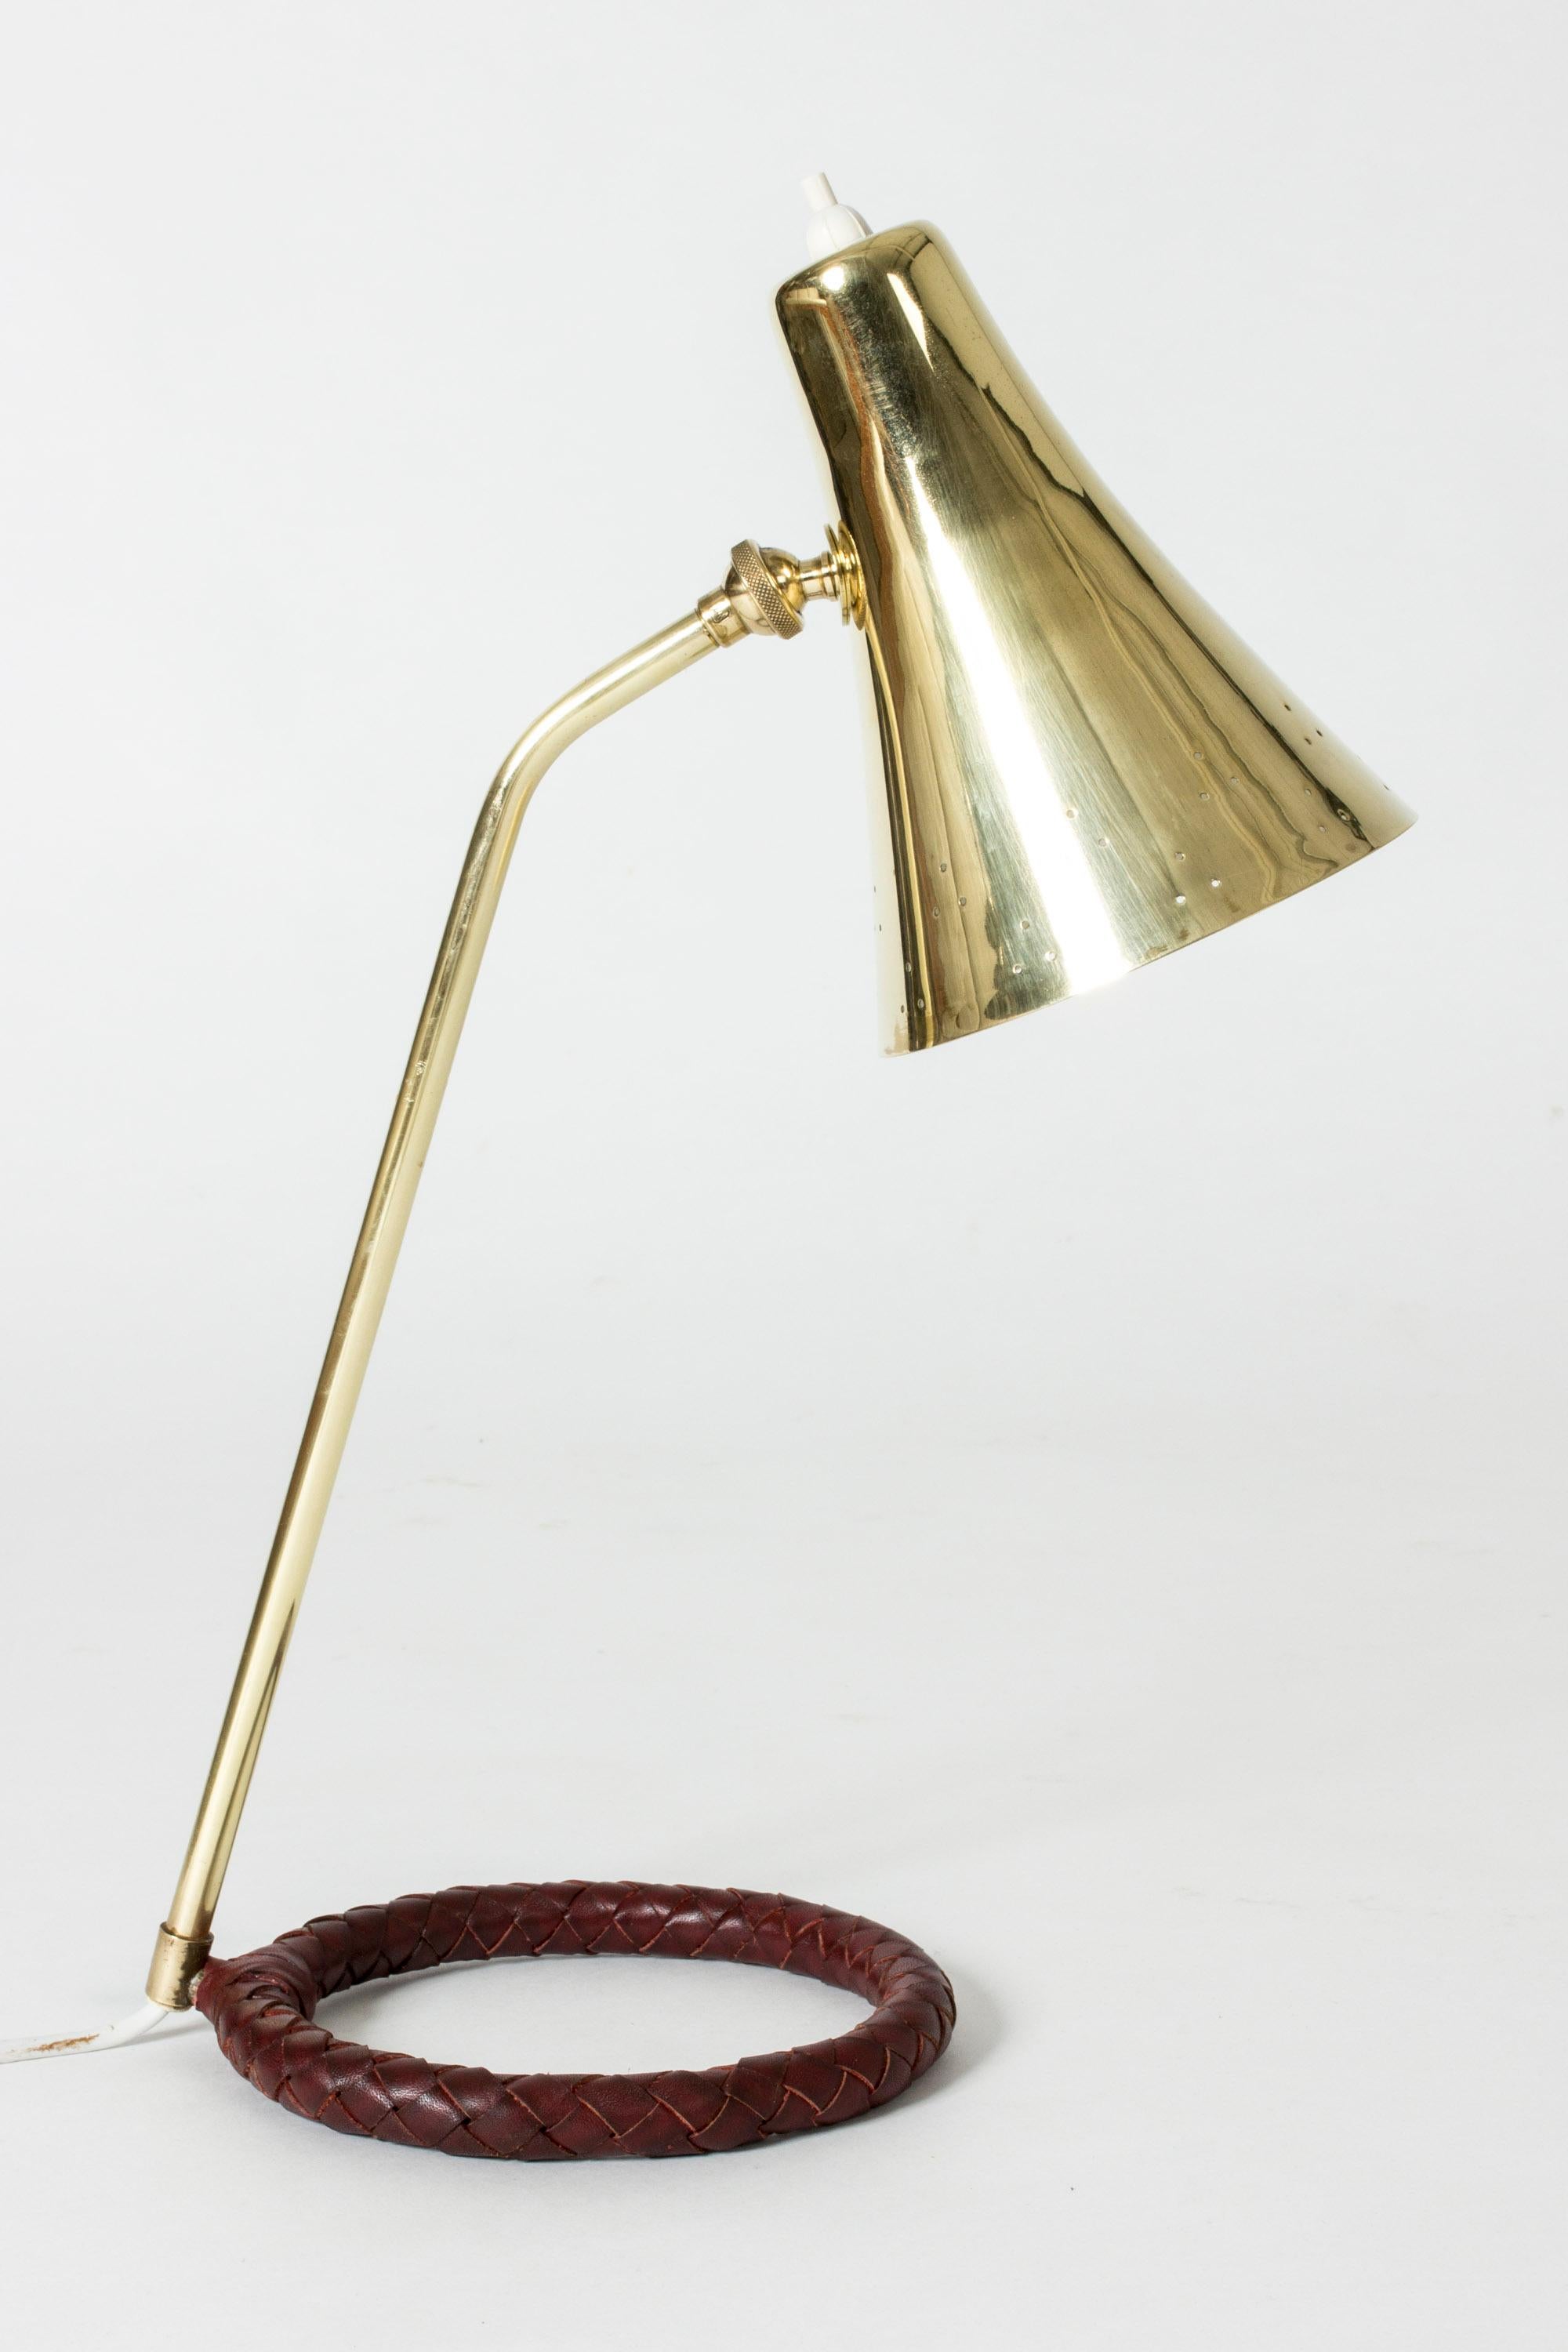 Elegant Danish midcentury brass table or desk lamp with a cool round base. Shade perforated with small decorative holes around the rim, base with wreathed brown leather.